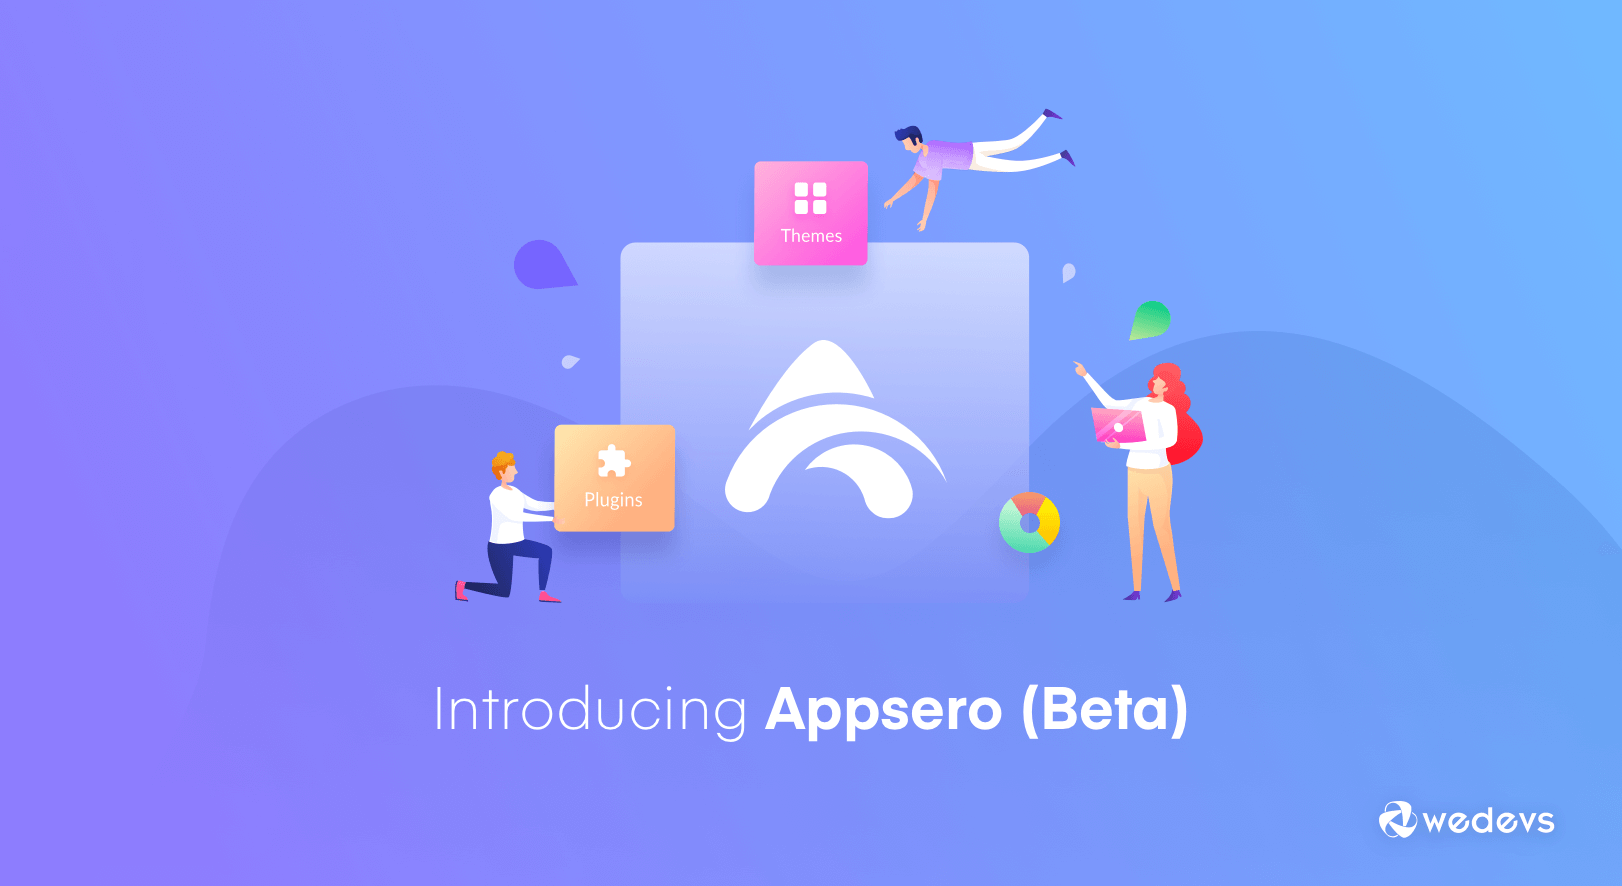 Introducing Appsero: Ultimate Platform for WordPress Devs to Manage Everything from One Single Place